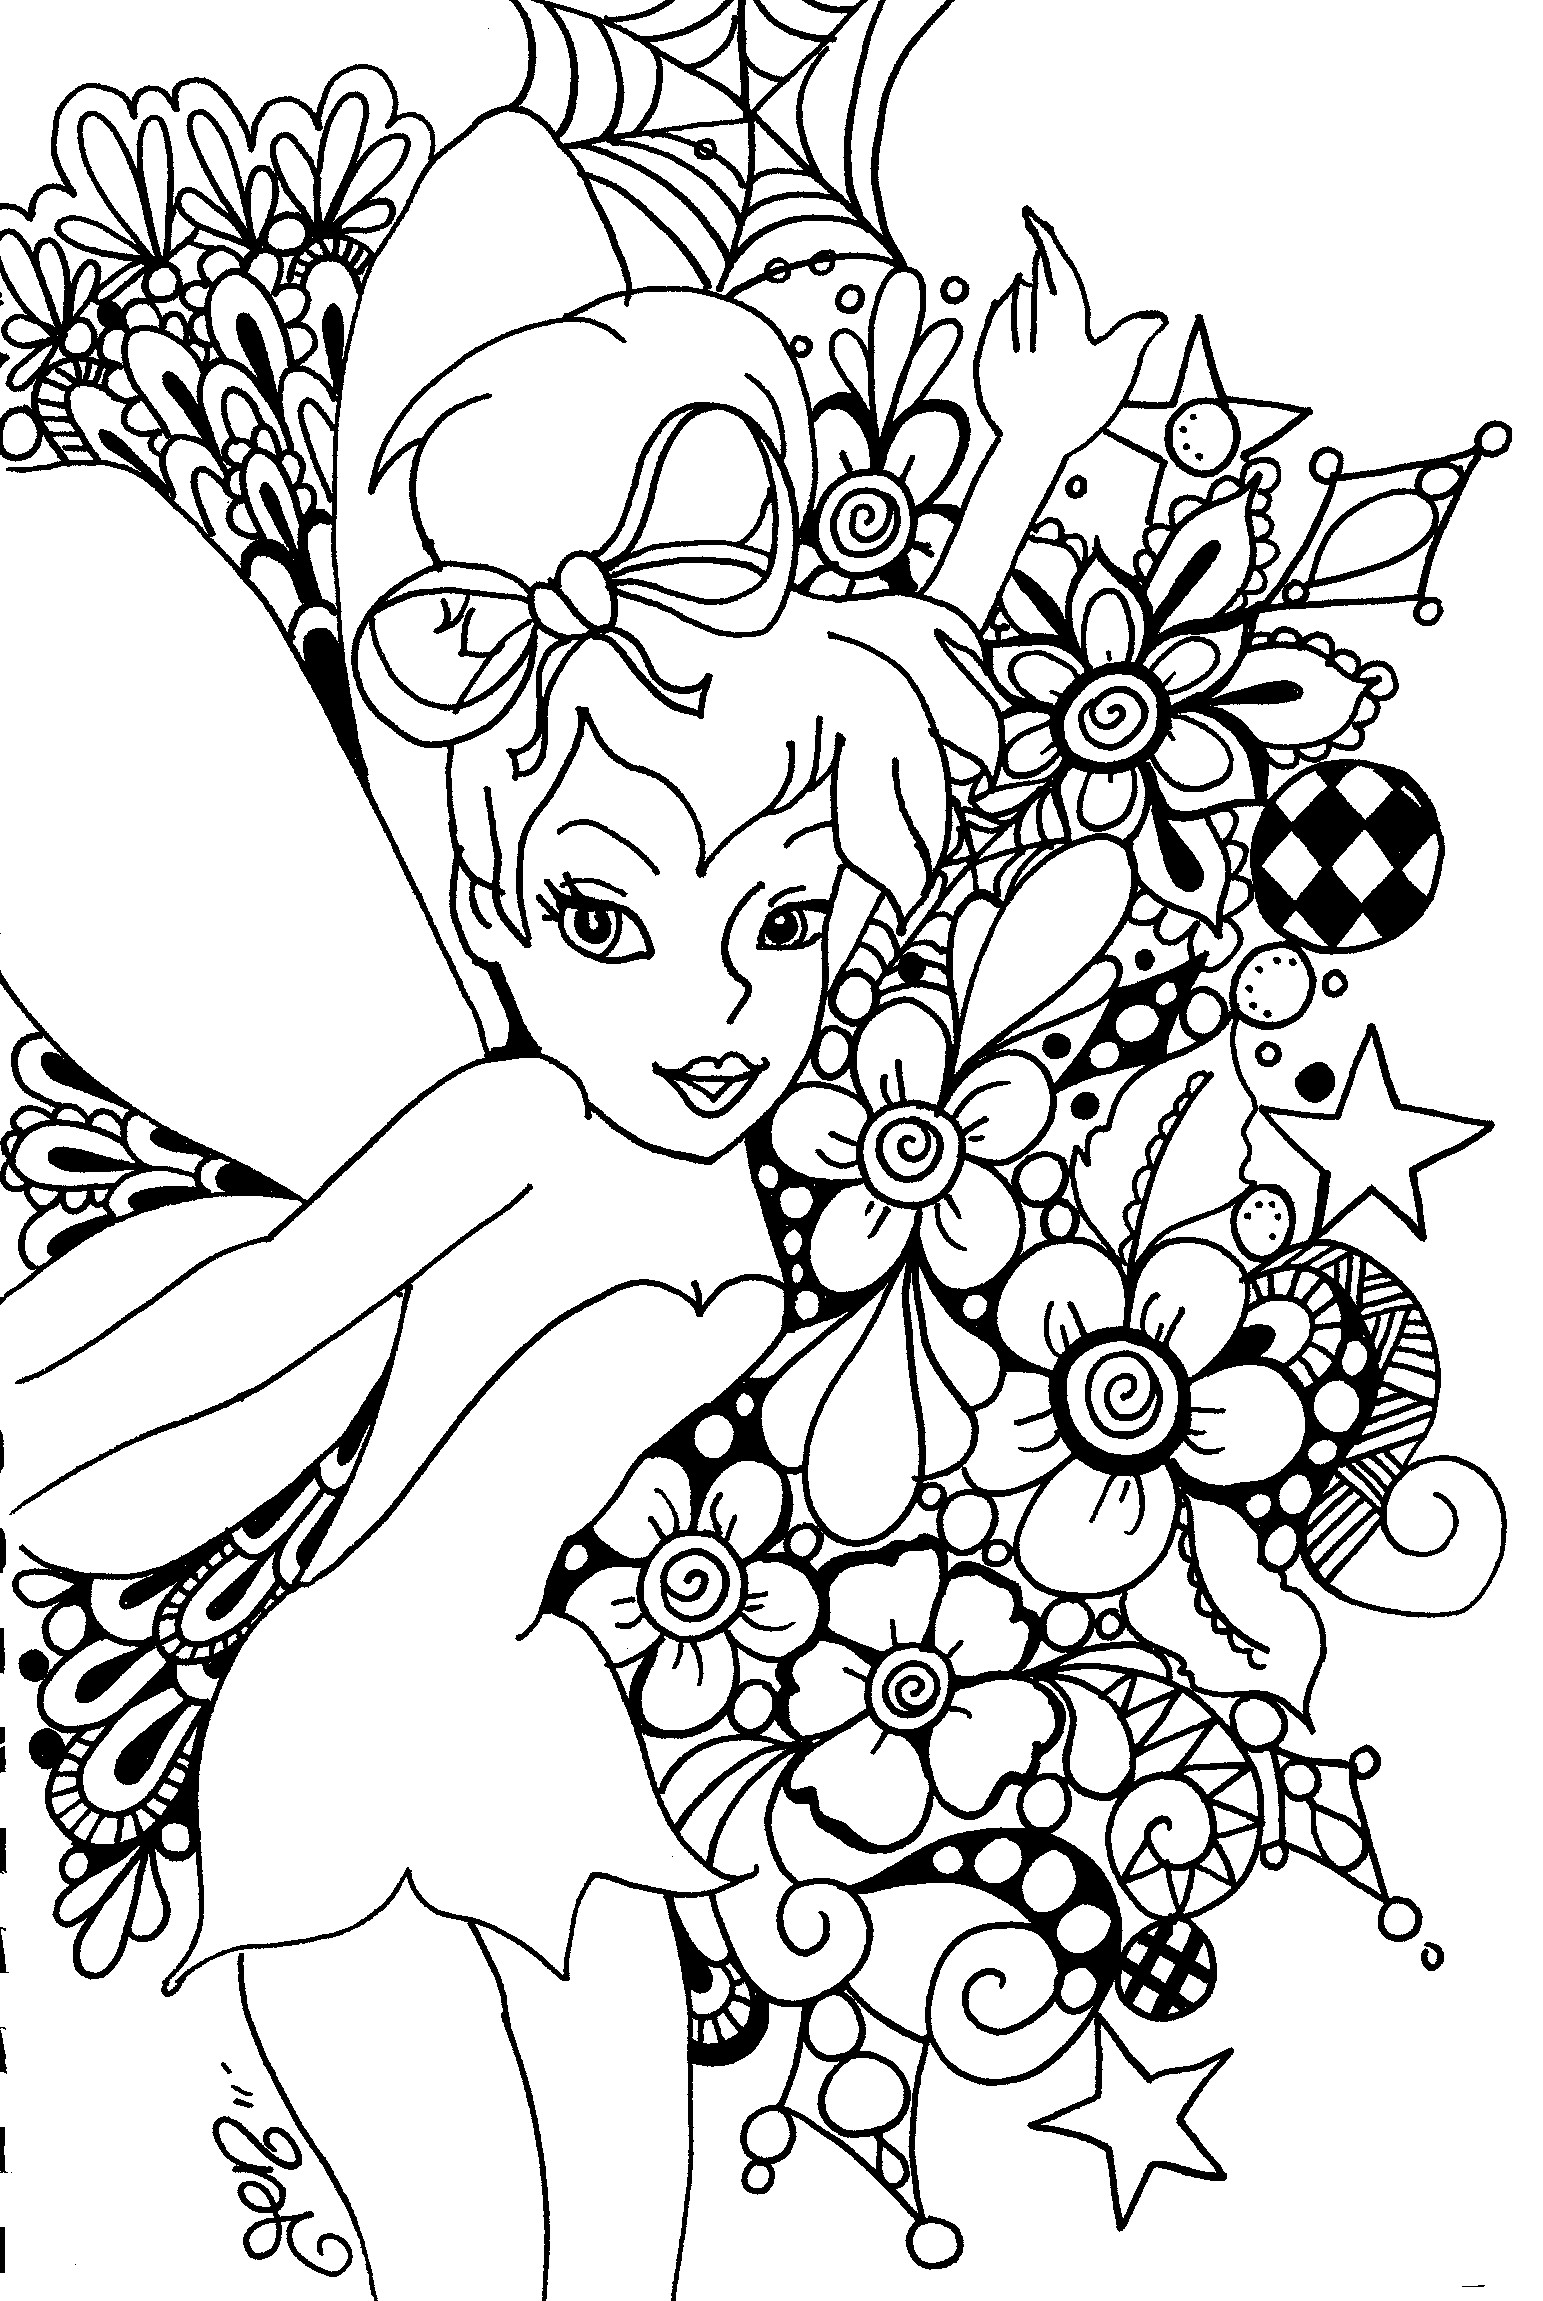 tinker-bell-coloring-pages-to-download-and-print-for-free